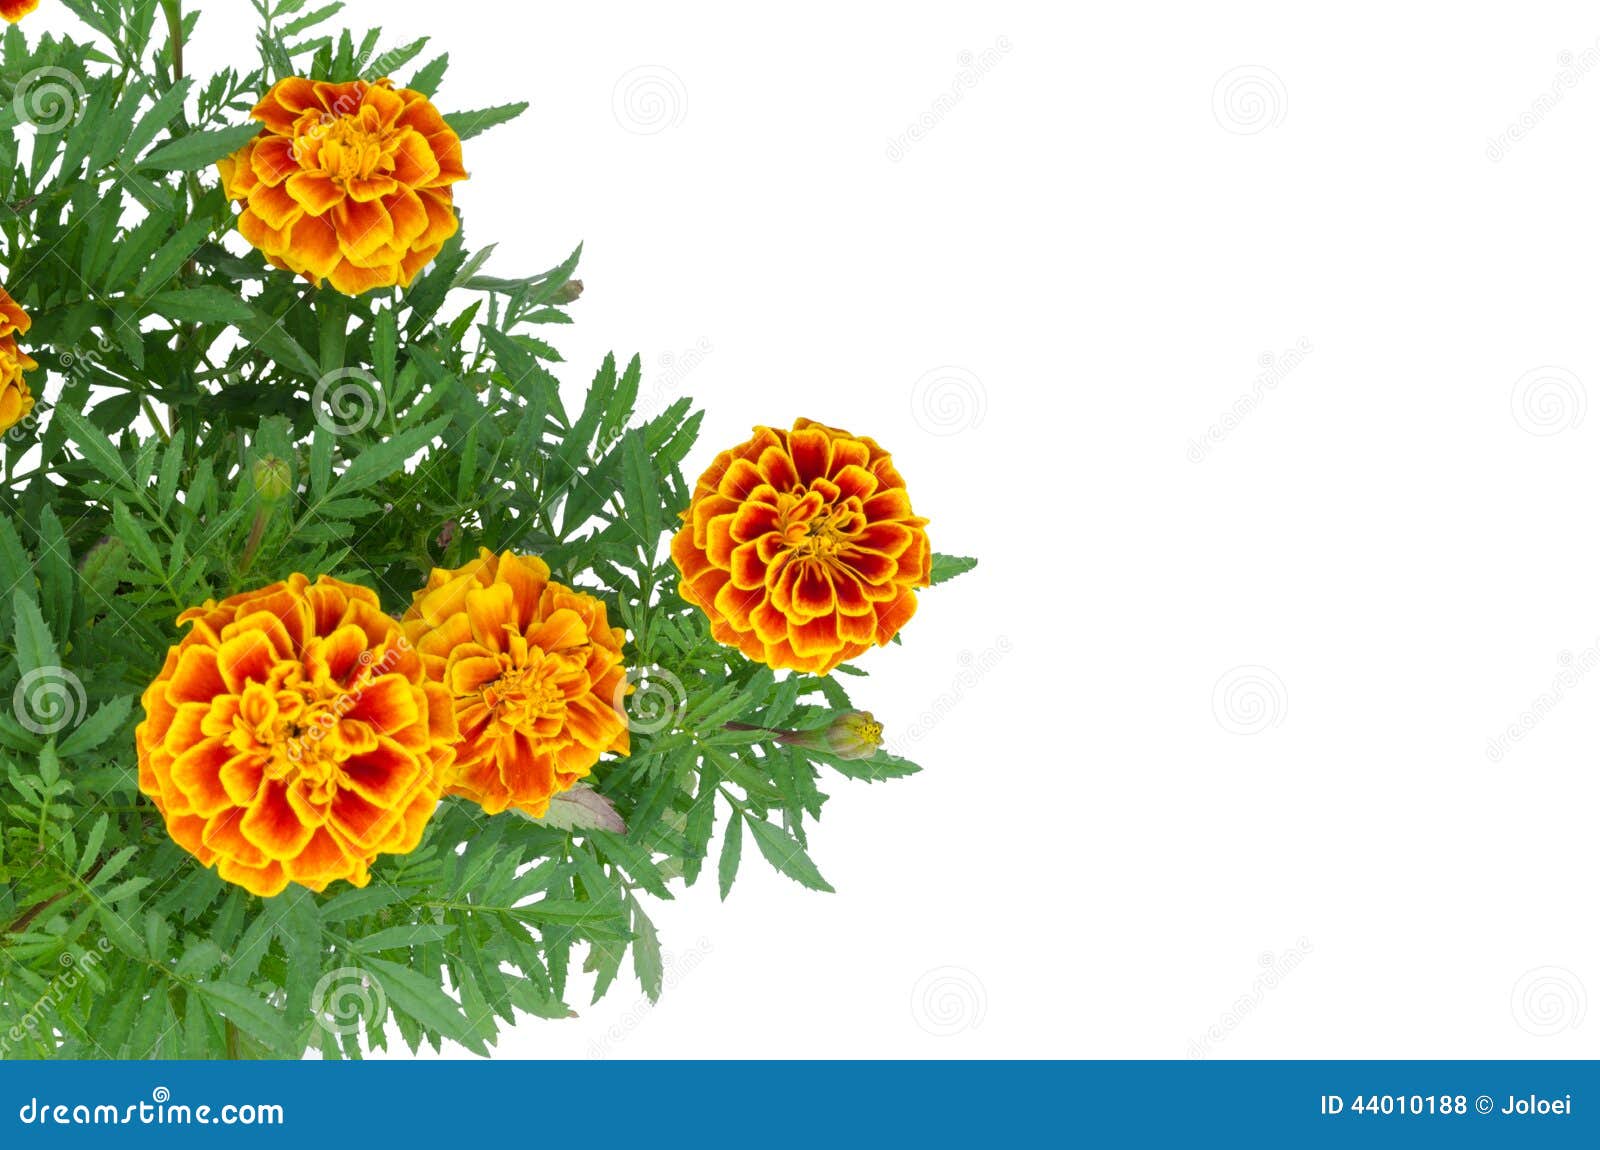 French Marigolds blooming on tree isolated on white background